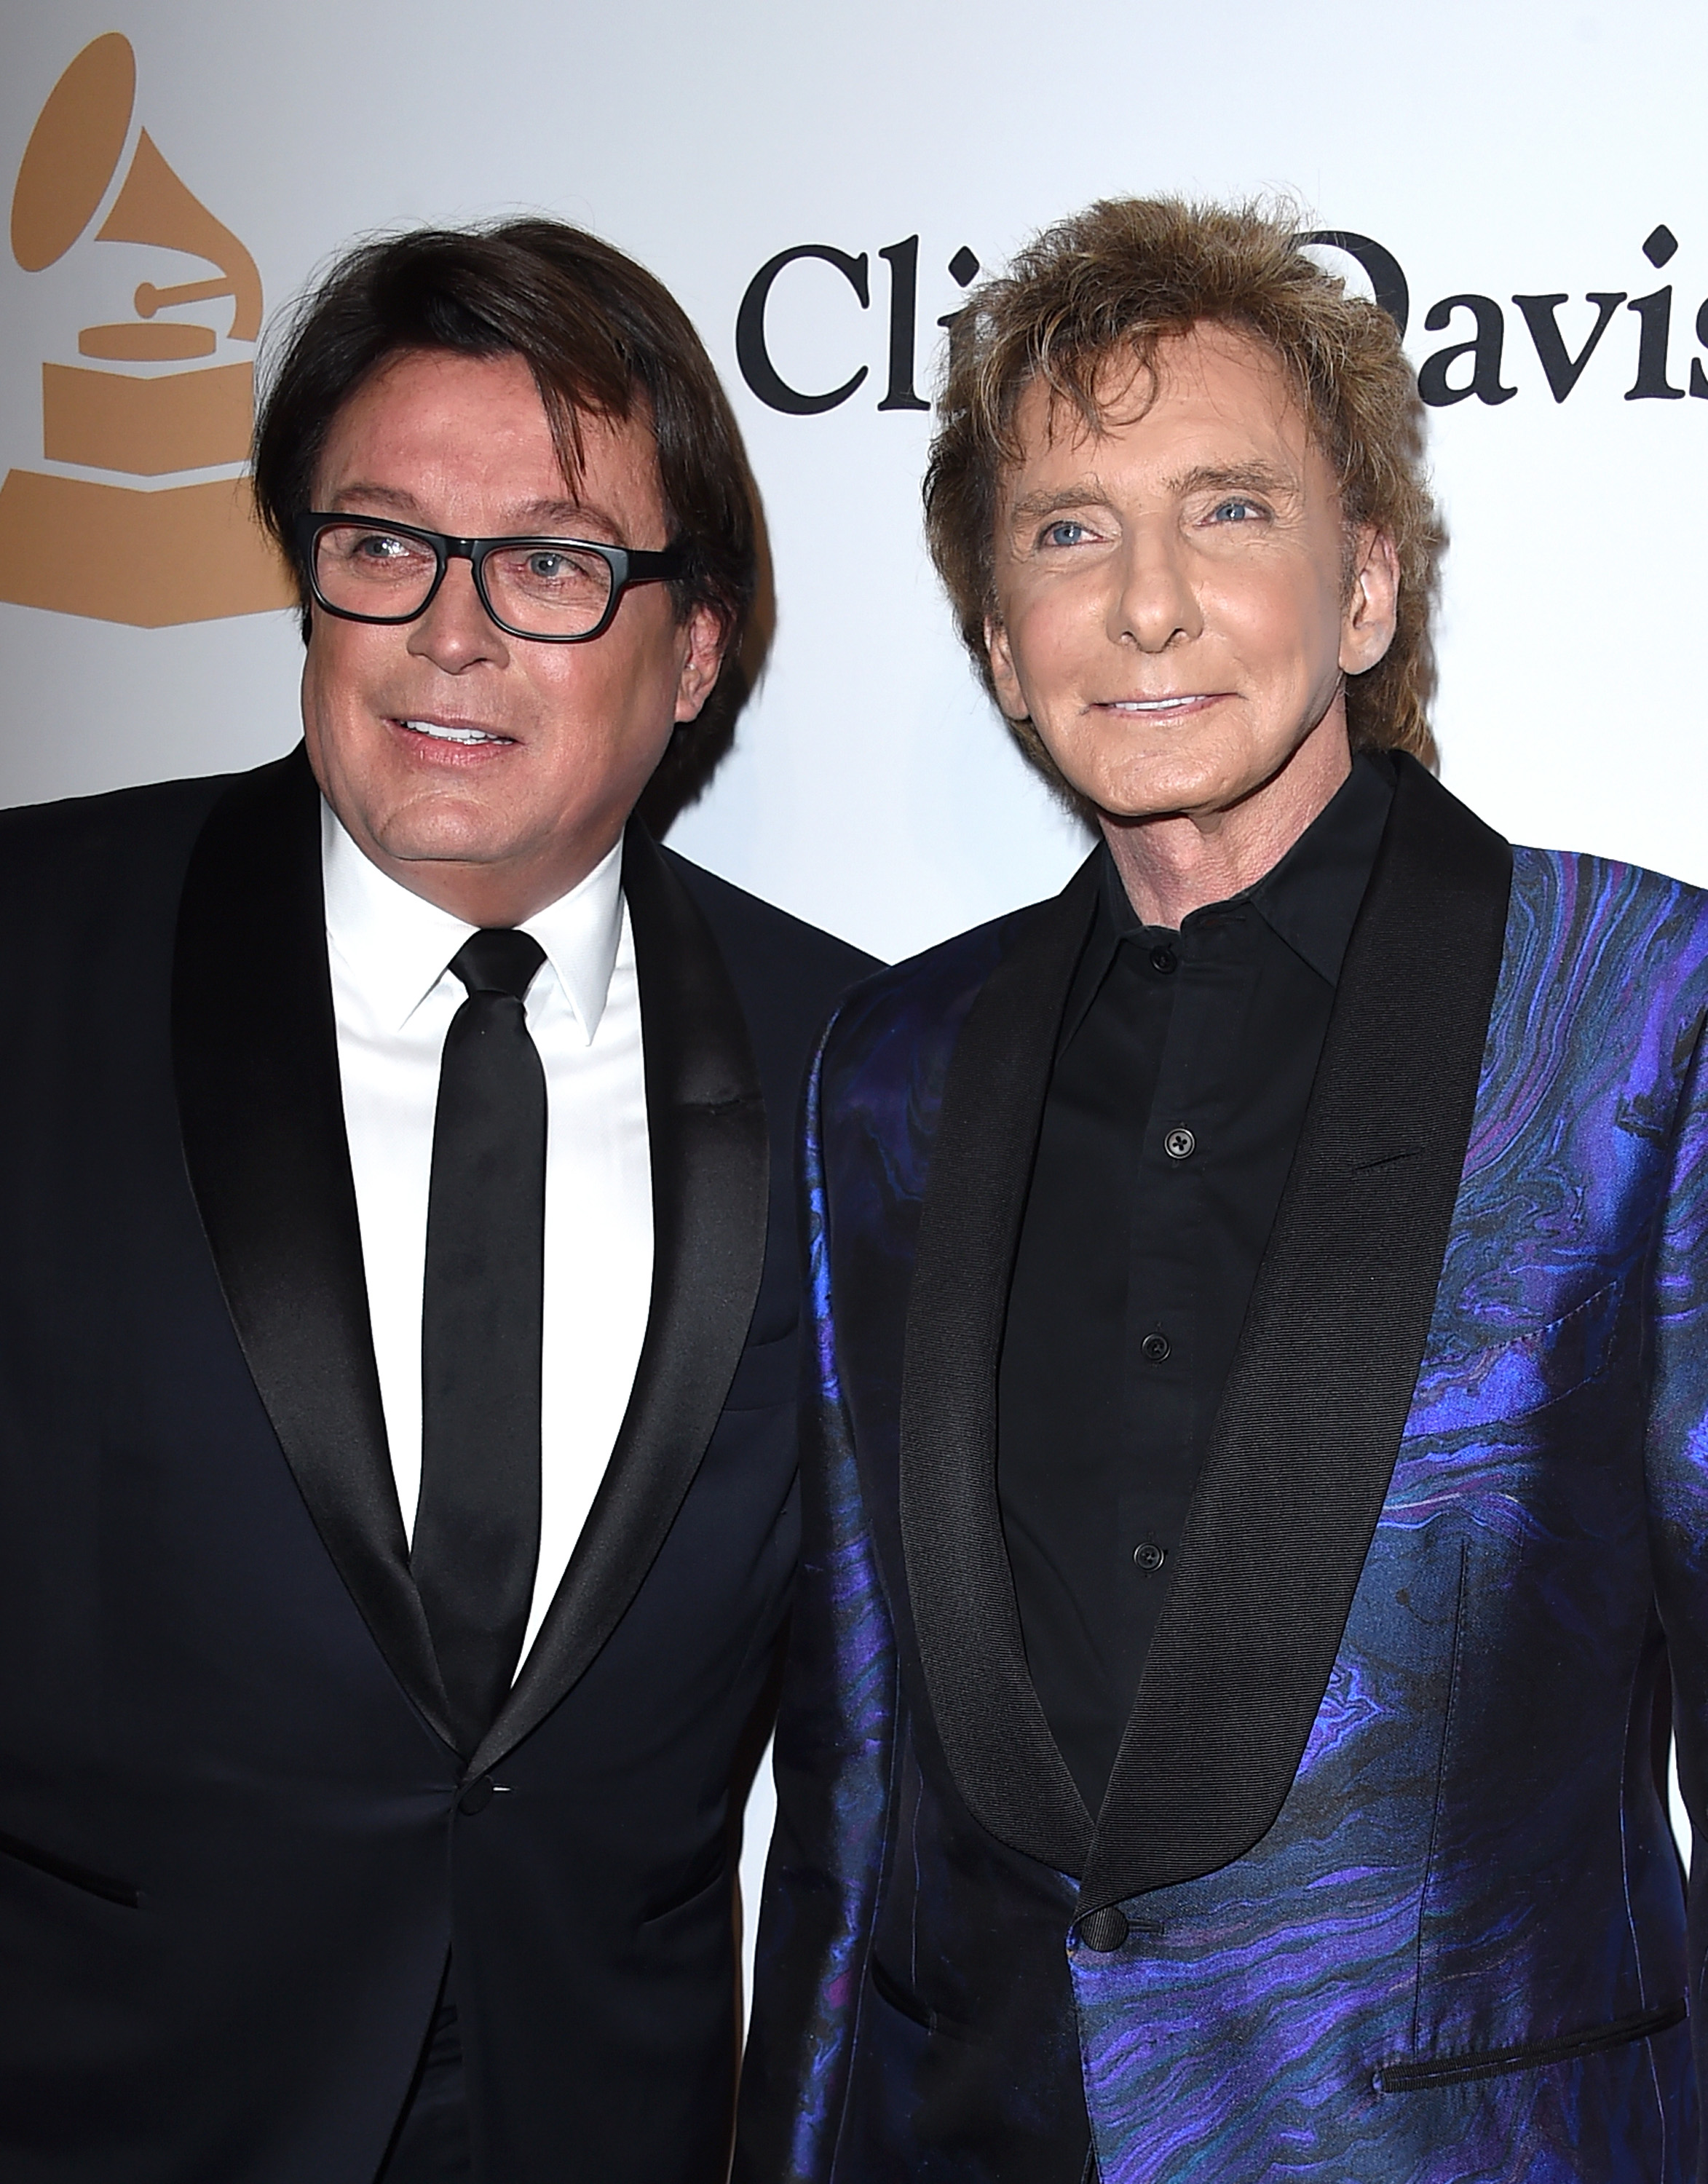 Garry Kief and Barry Manilow at the Pre-Grammy Gala in Beverly Hills, California on February 14, 2016 | Source: Getty Images